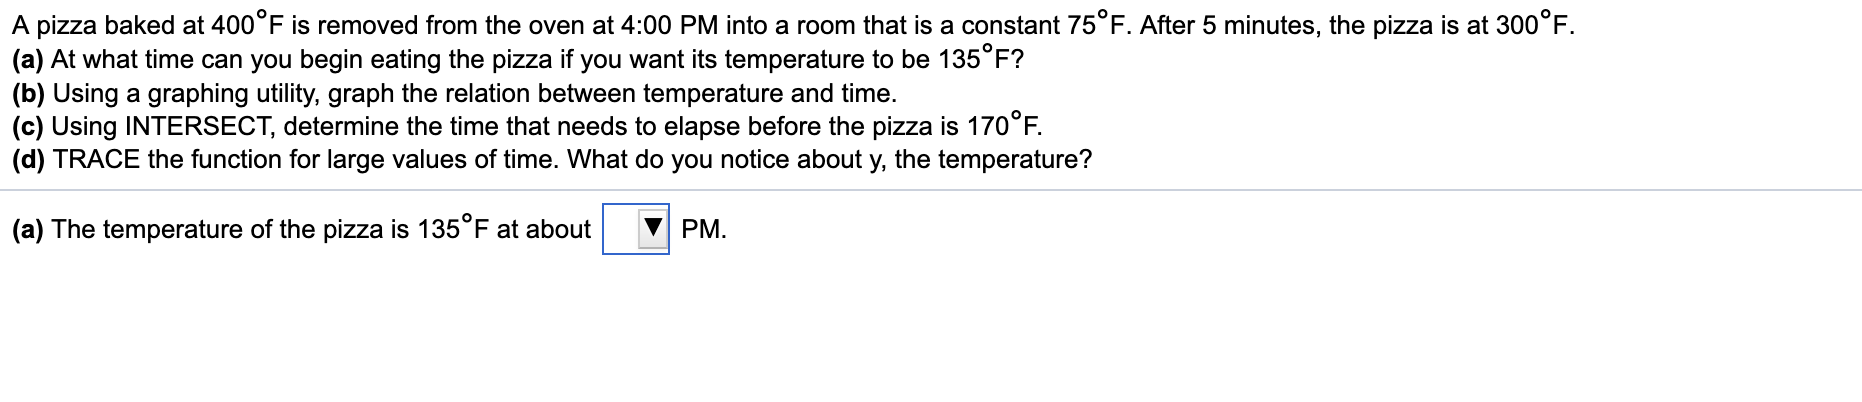 A pizza baked at 400°F is removed from the oven at 4:00 PM into a room that is a constant 75°F. After 5 minutes, the pizza is at 300°F.
(a) At what time can you begin eating the pizza if you want its temperature to be 135°F?
(b) Using a graphing utility, graph the relation between temperature and time.
(c) Using INTERSECT, determine the time that needs to elapse before the pizza is 170°F.
(d) TRACE the function for large values of time. What do you notice about y, the temperature?
(a) The temperature of the pizza is 135°F at about
PM.
